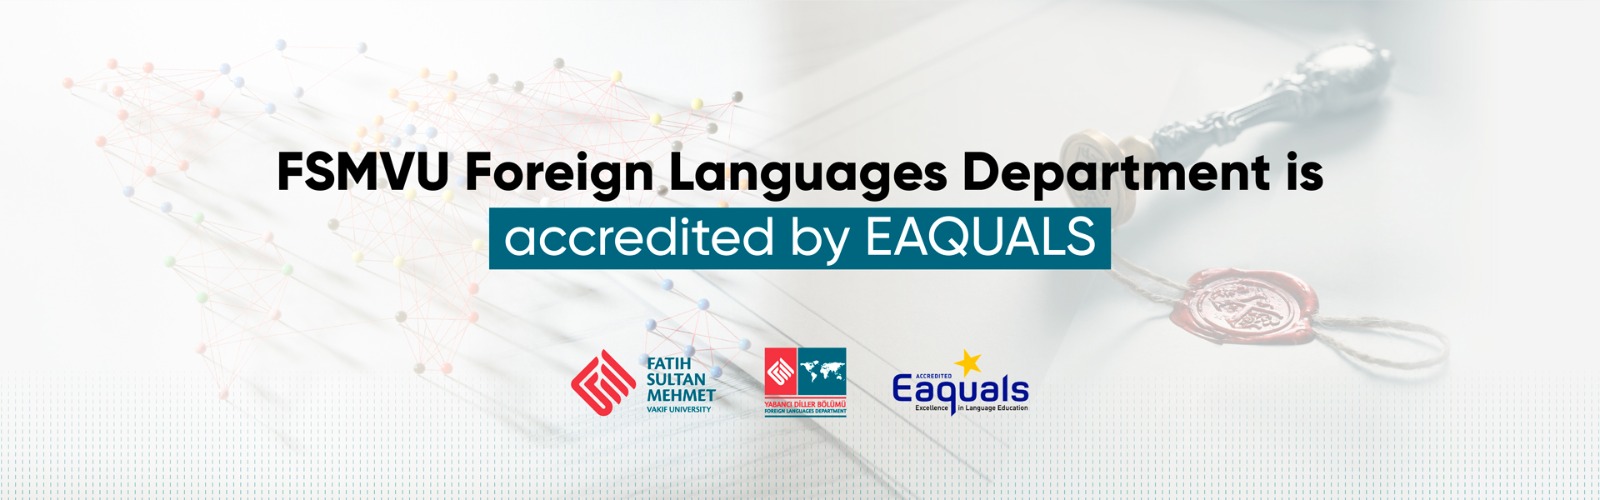 FSMVU Foreign Languages Department is accredited by EAQUALS